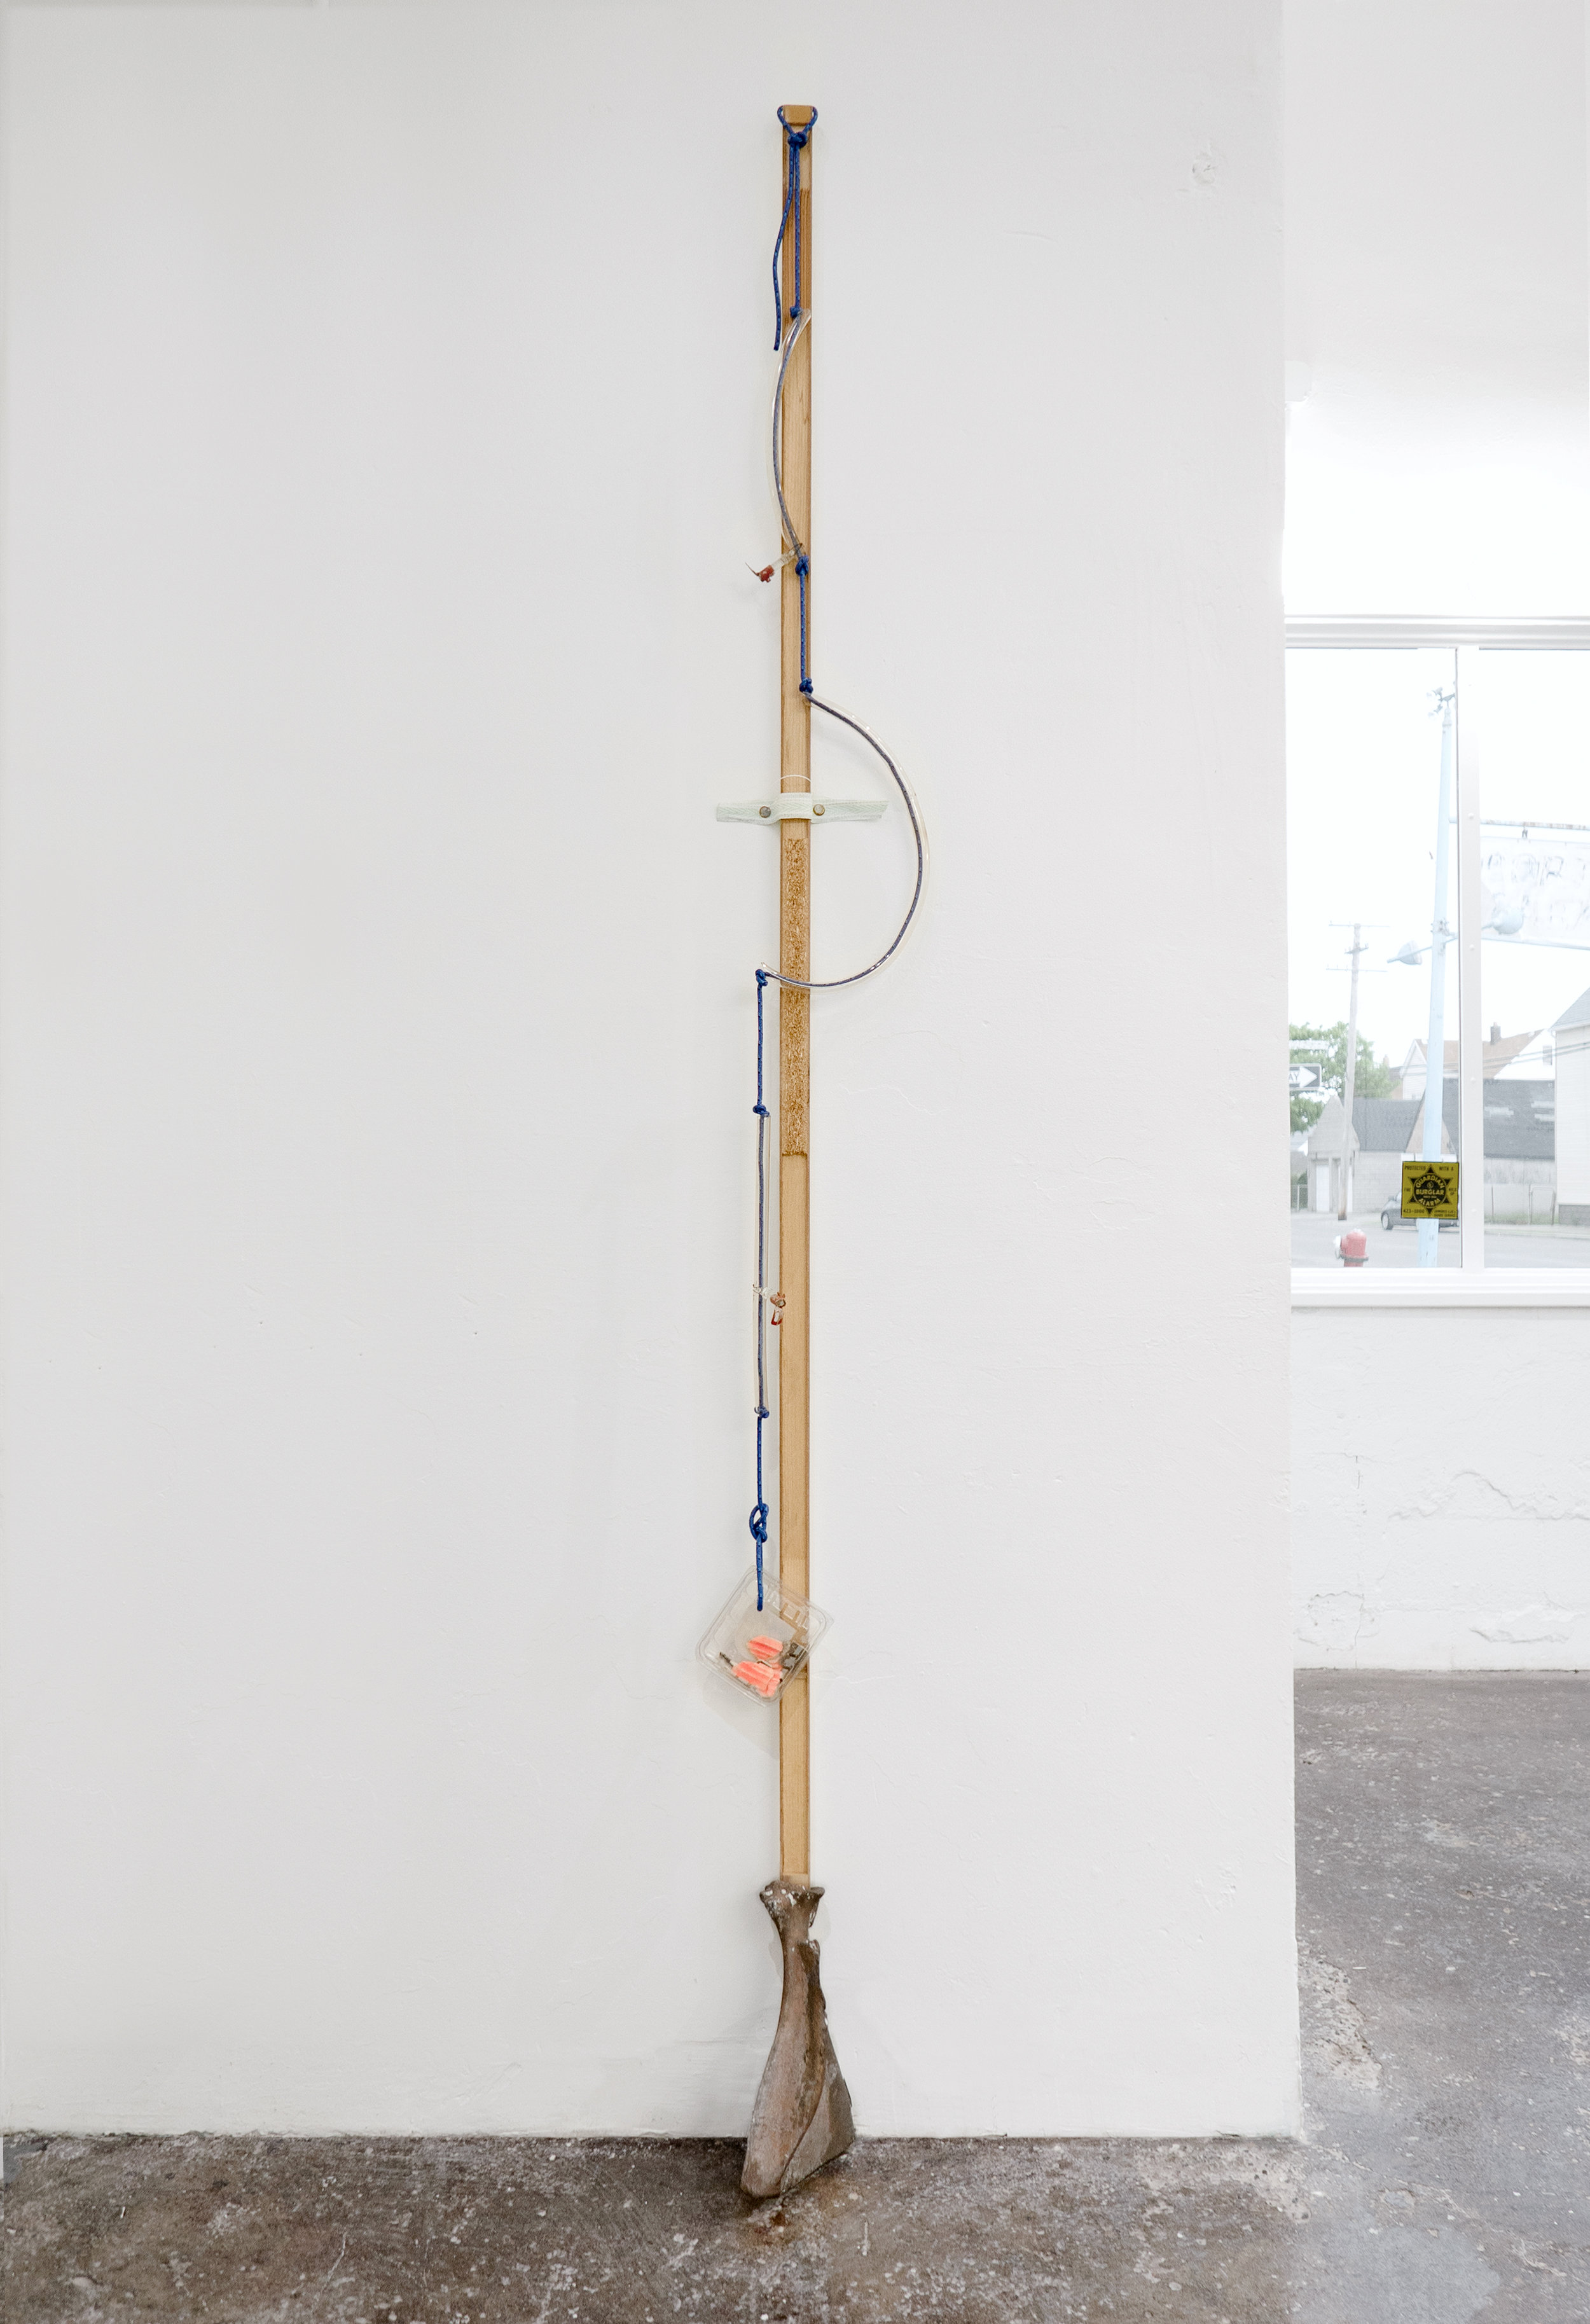  Matt Siegel,  N , 2019, Raw bronze, hollow core door, accessory cord, neon glass tubing (sourced: abandoned China Buffet, Evanston, WY), blueberry container, found objects, wind, 92 x 8 x 5 in 